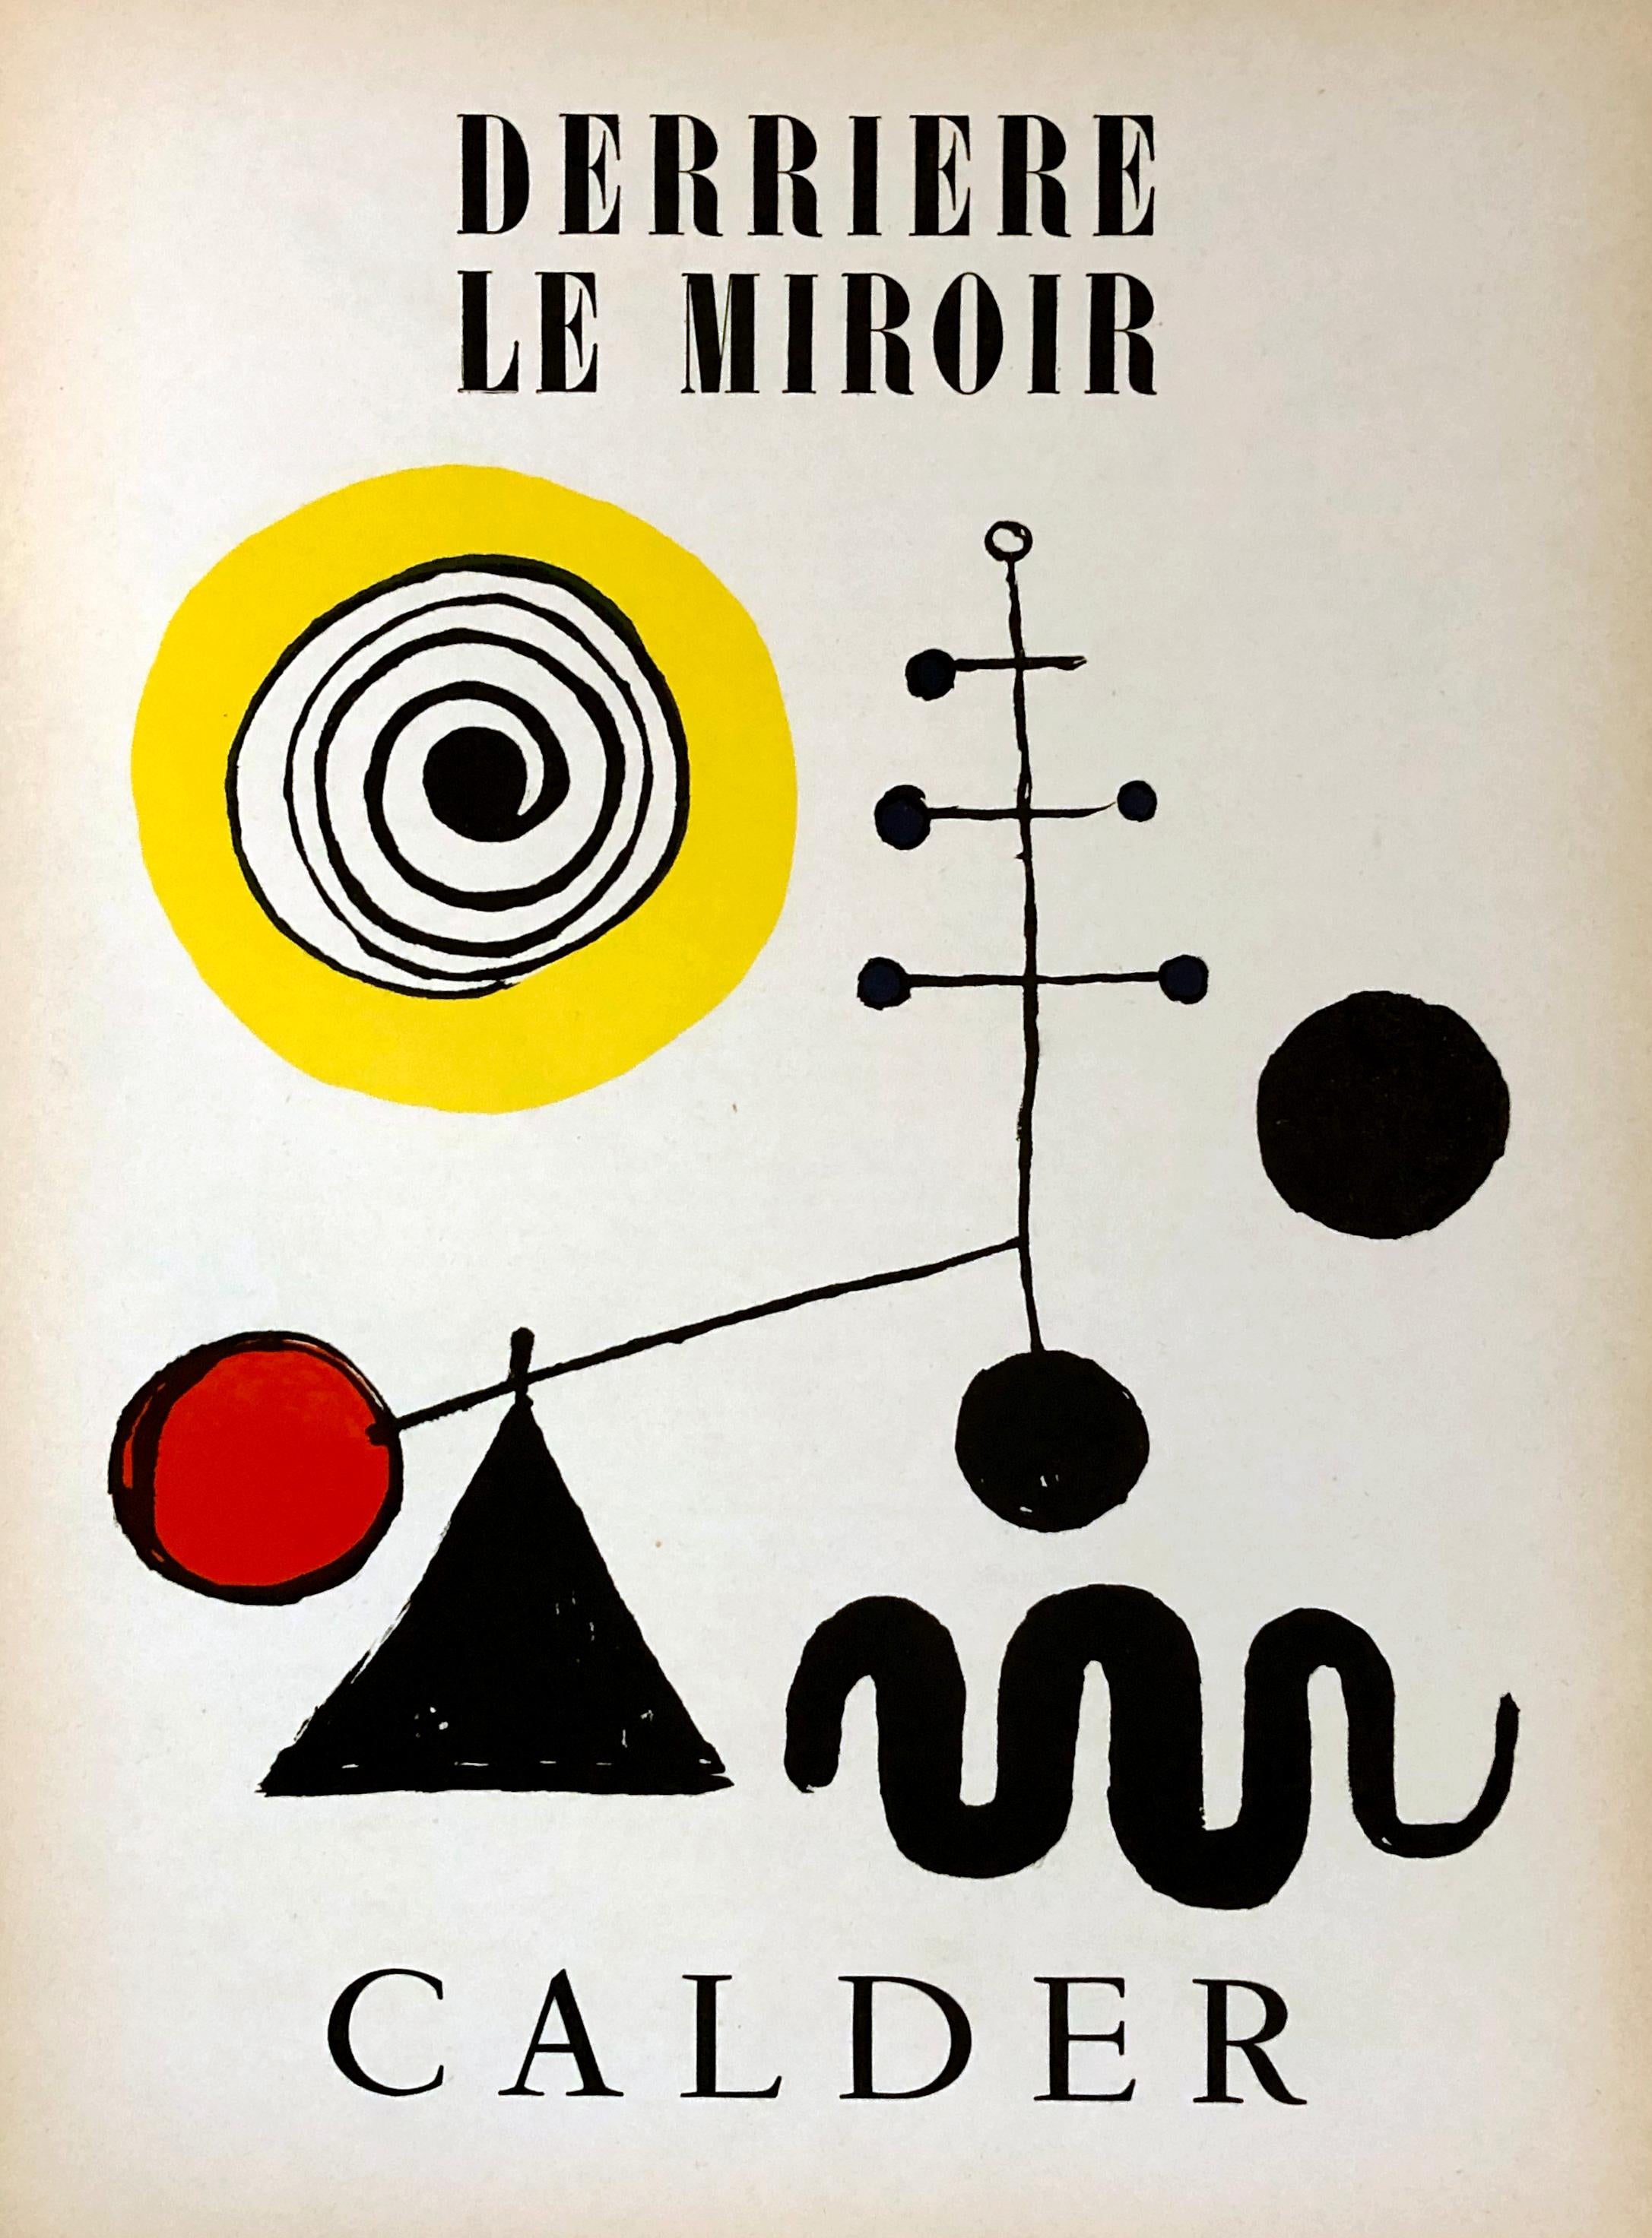 Alexander Derriere Le Miroir c. 1951
Published by: Galerie Maeght, Paris commeuarte tan early 1950s exhibiting featuring Calder mobiles and stabiles. Includes an original lithographic cover and text by Franand Léger among others. Fine condition.